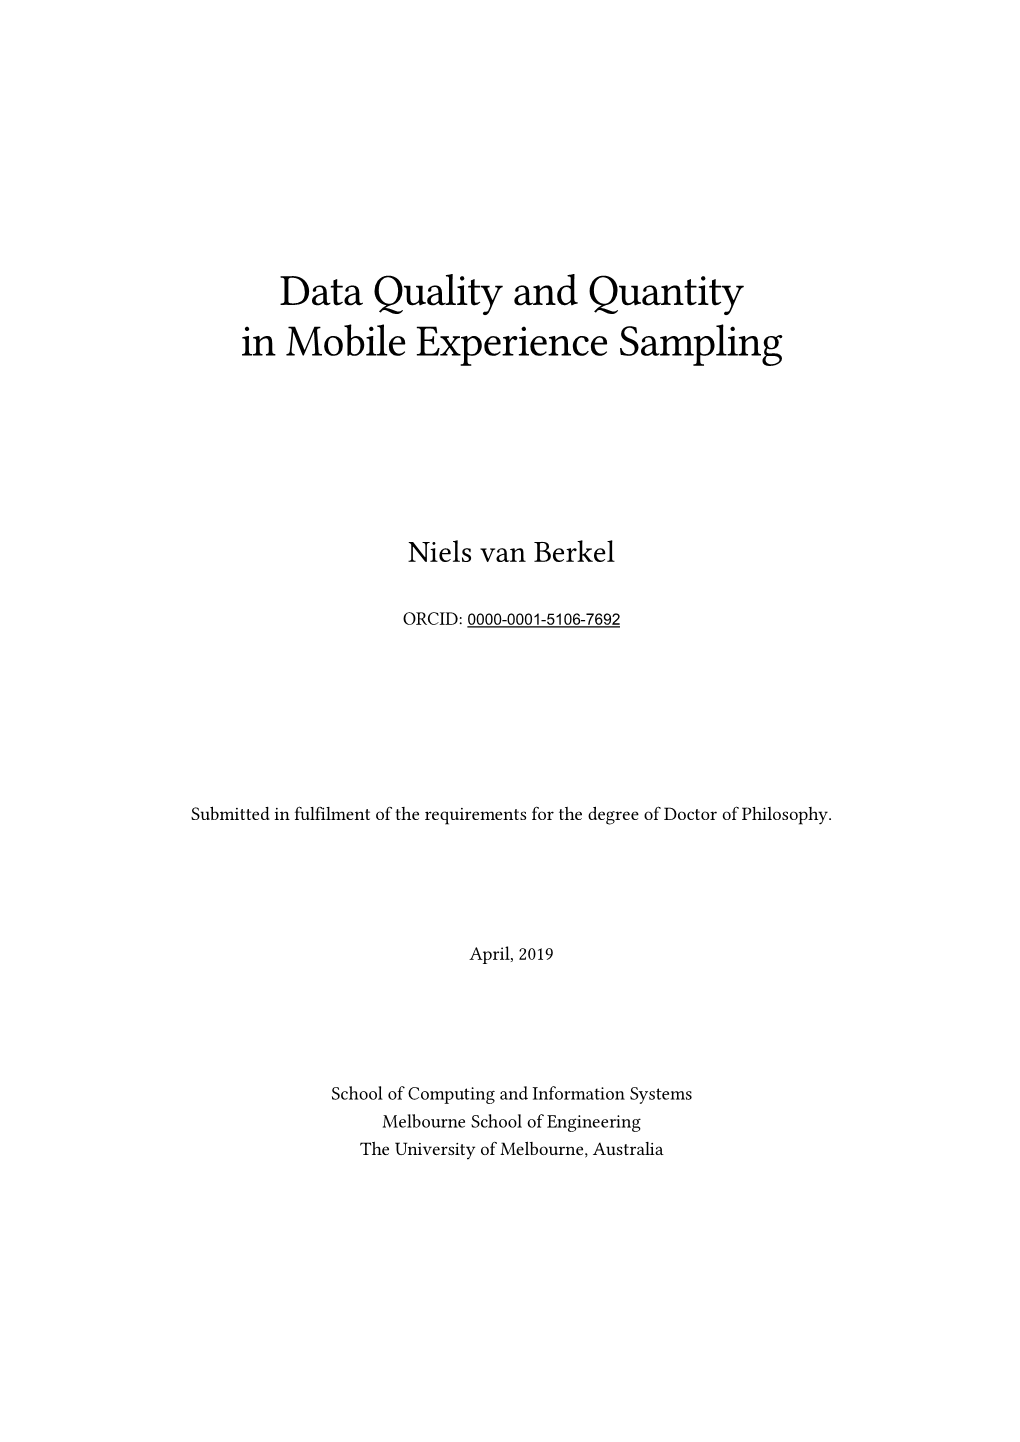 Data Quality and Quantity in Mobile Experience Sampling